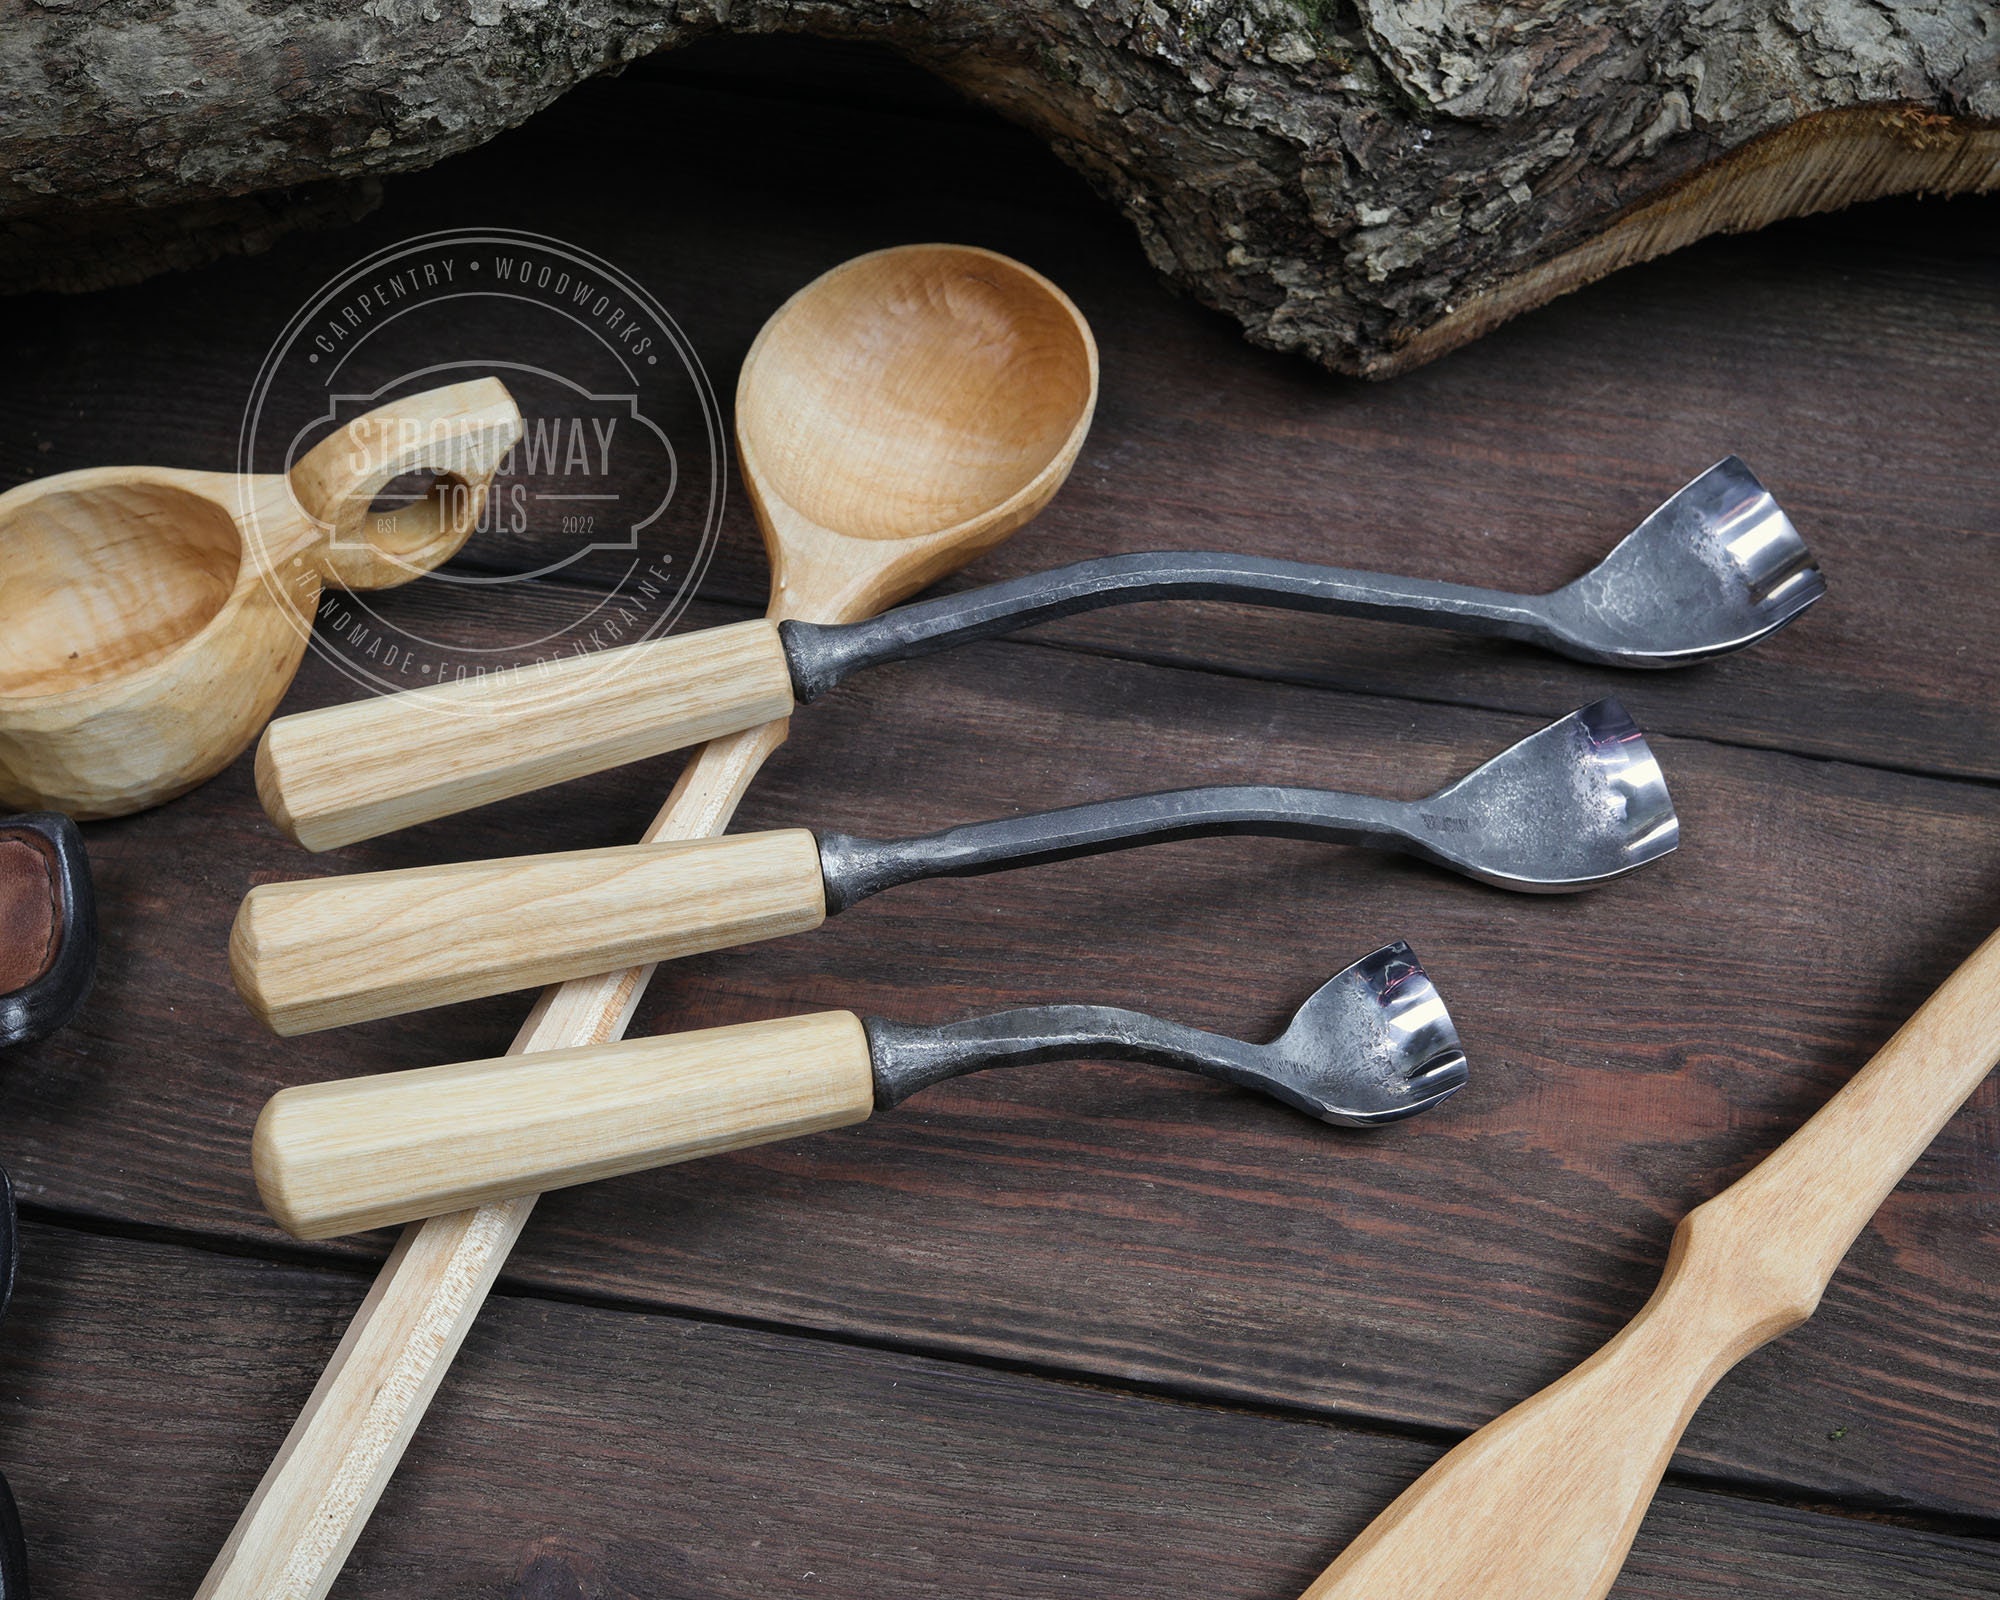 Timber Framing Tools - The Spoon Crank